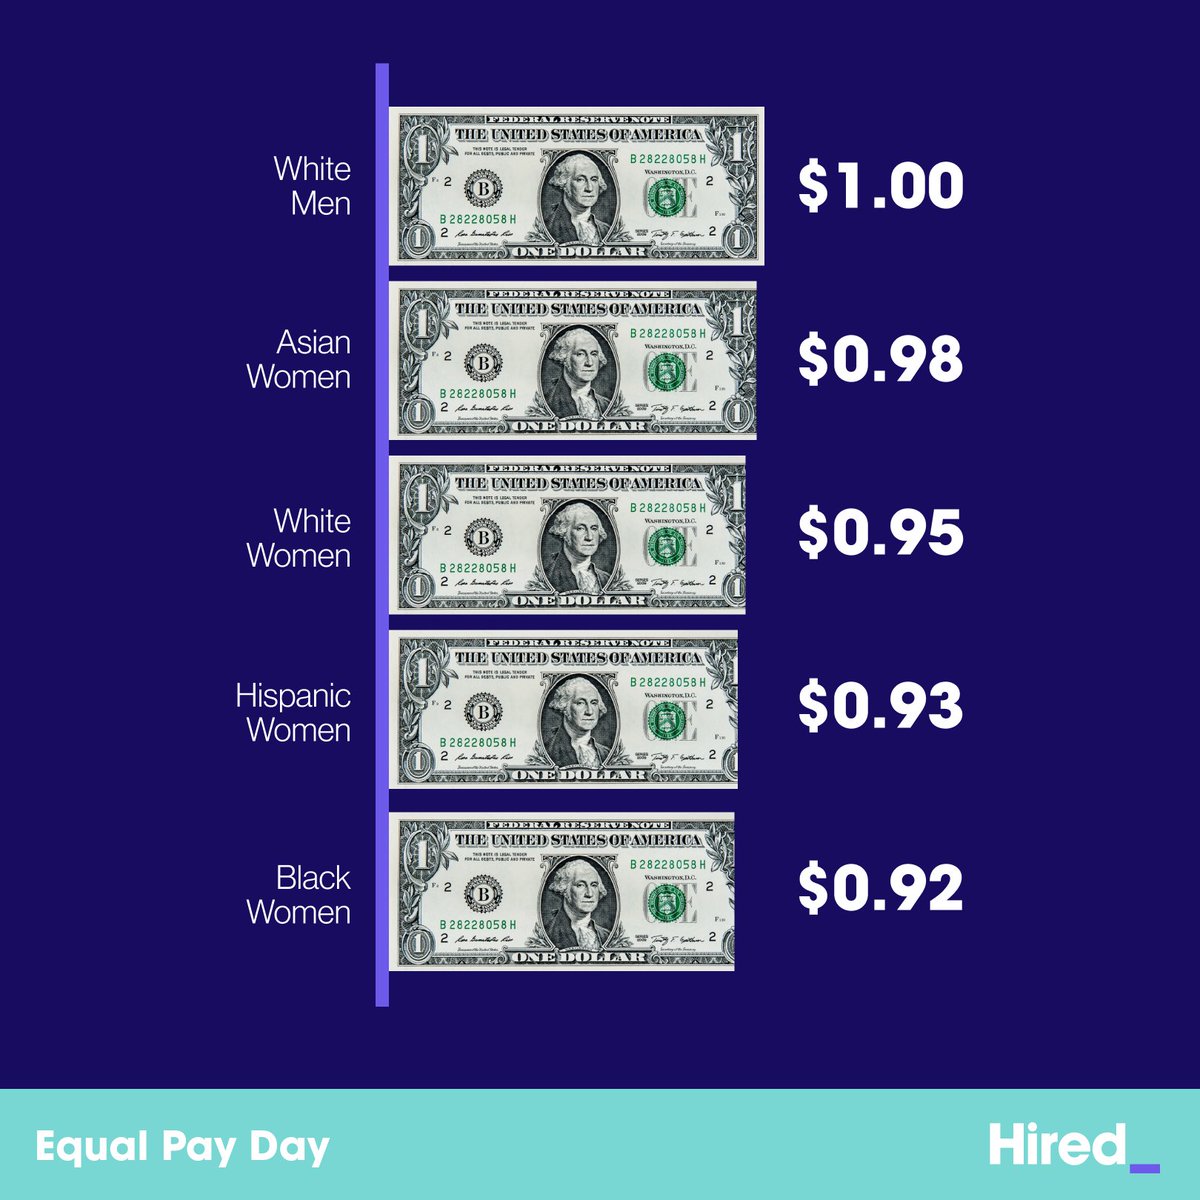 #EqualPayDay recognizes the ongoing issue of #pay disparity and the #paygap between men and women. ⚖️ Hired's 2022 #WageInequality report found the US #wagegap in 2021 narrowed across race and gender from the previous year, except for Black women.